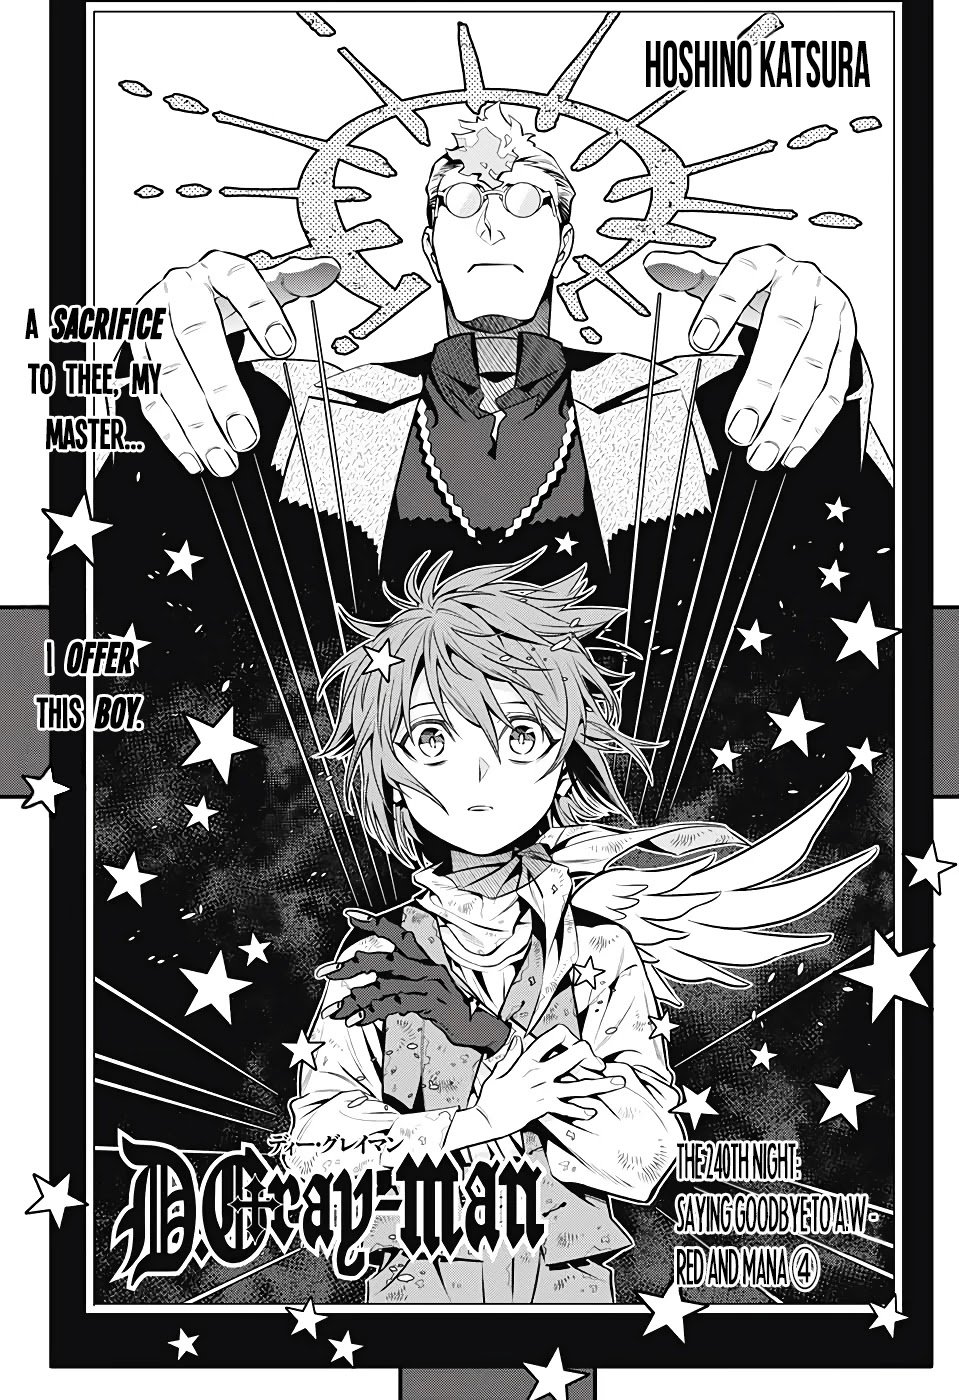 D.Gray-man chapter 240 page 7